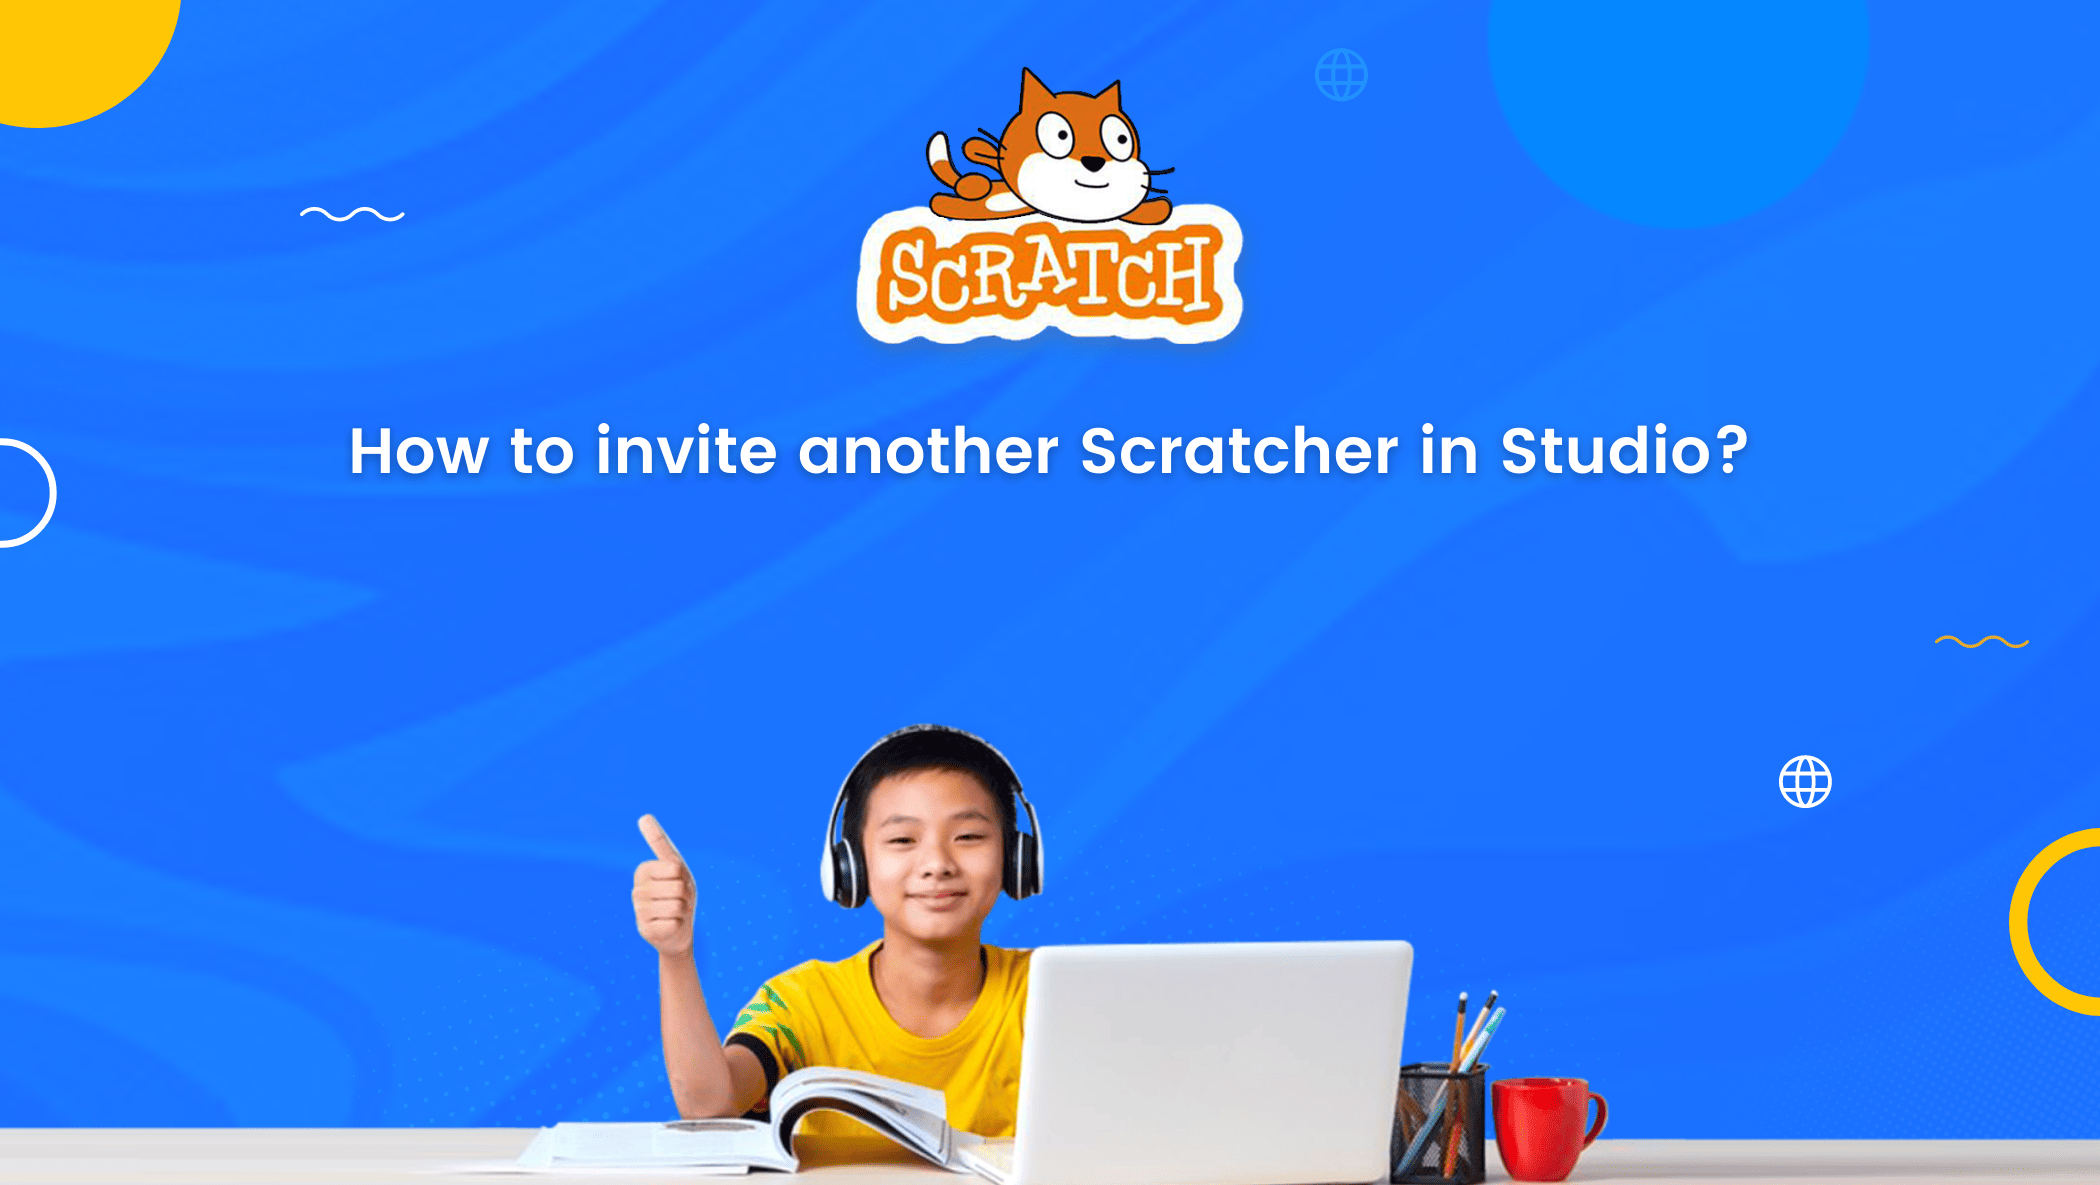 How to invite another Scratcher in Studio